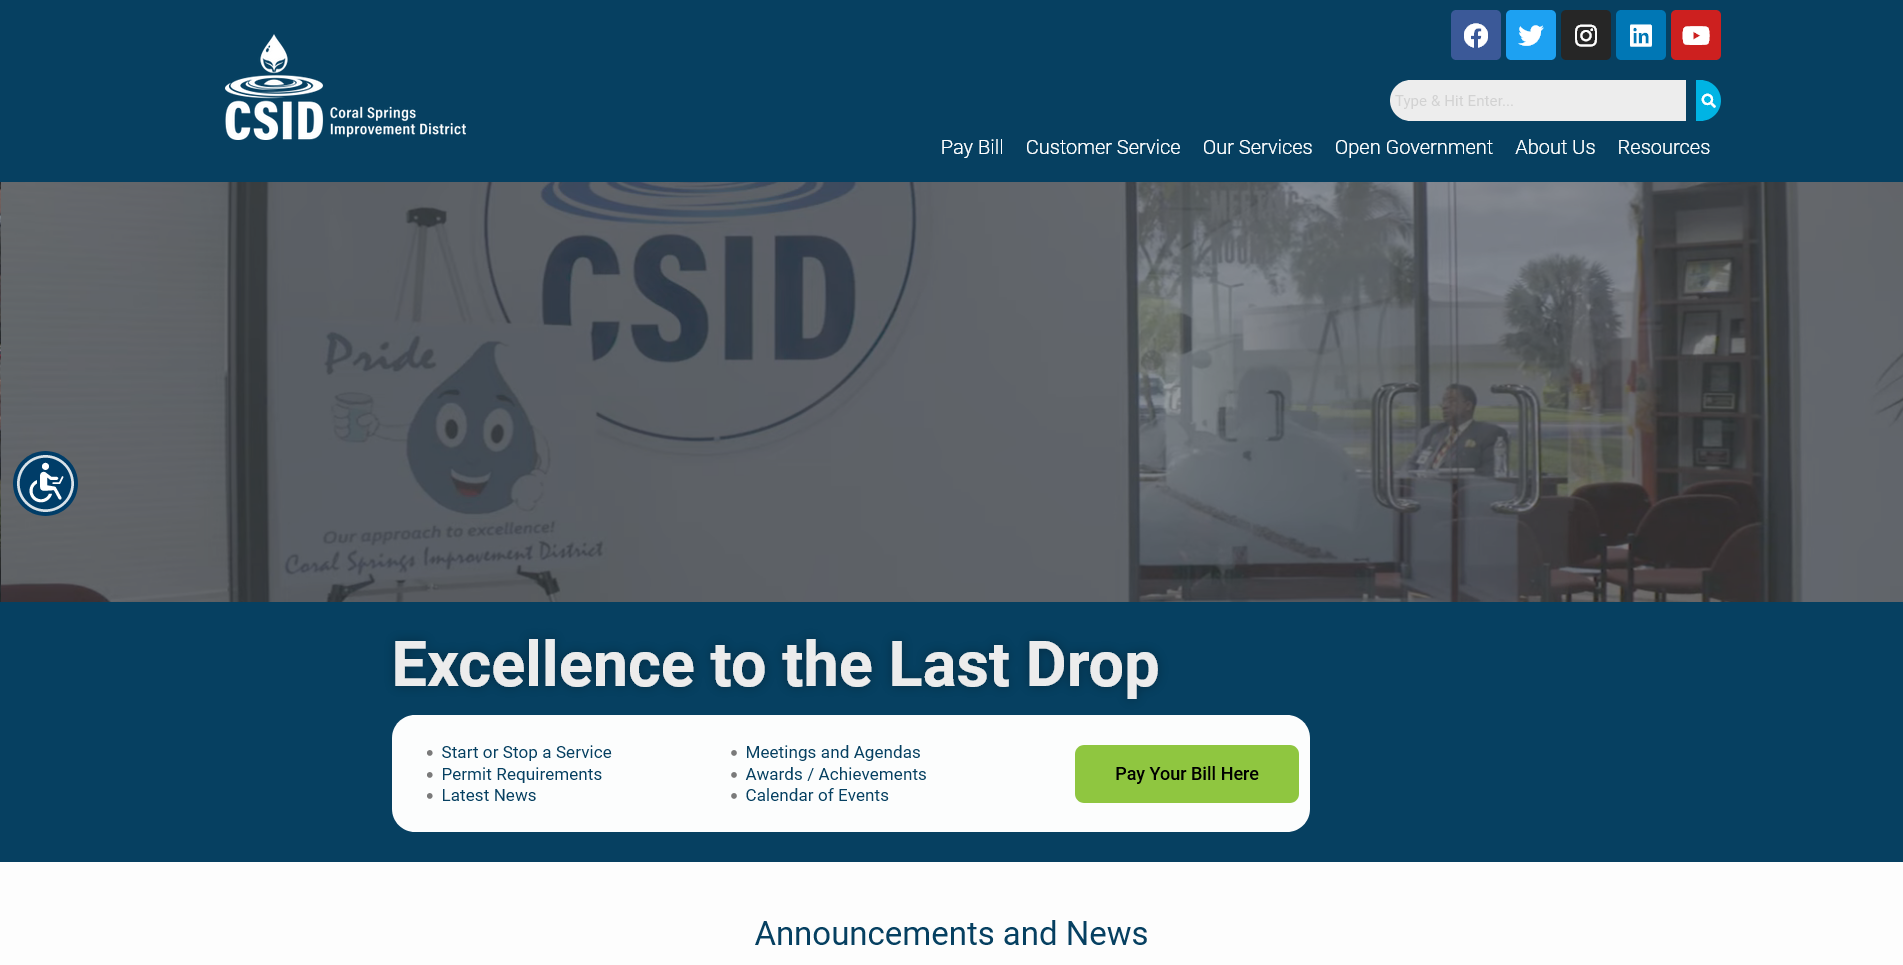 CSID – Coral Springs Improvement District